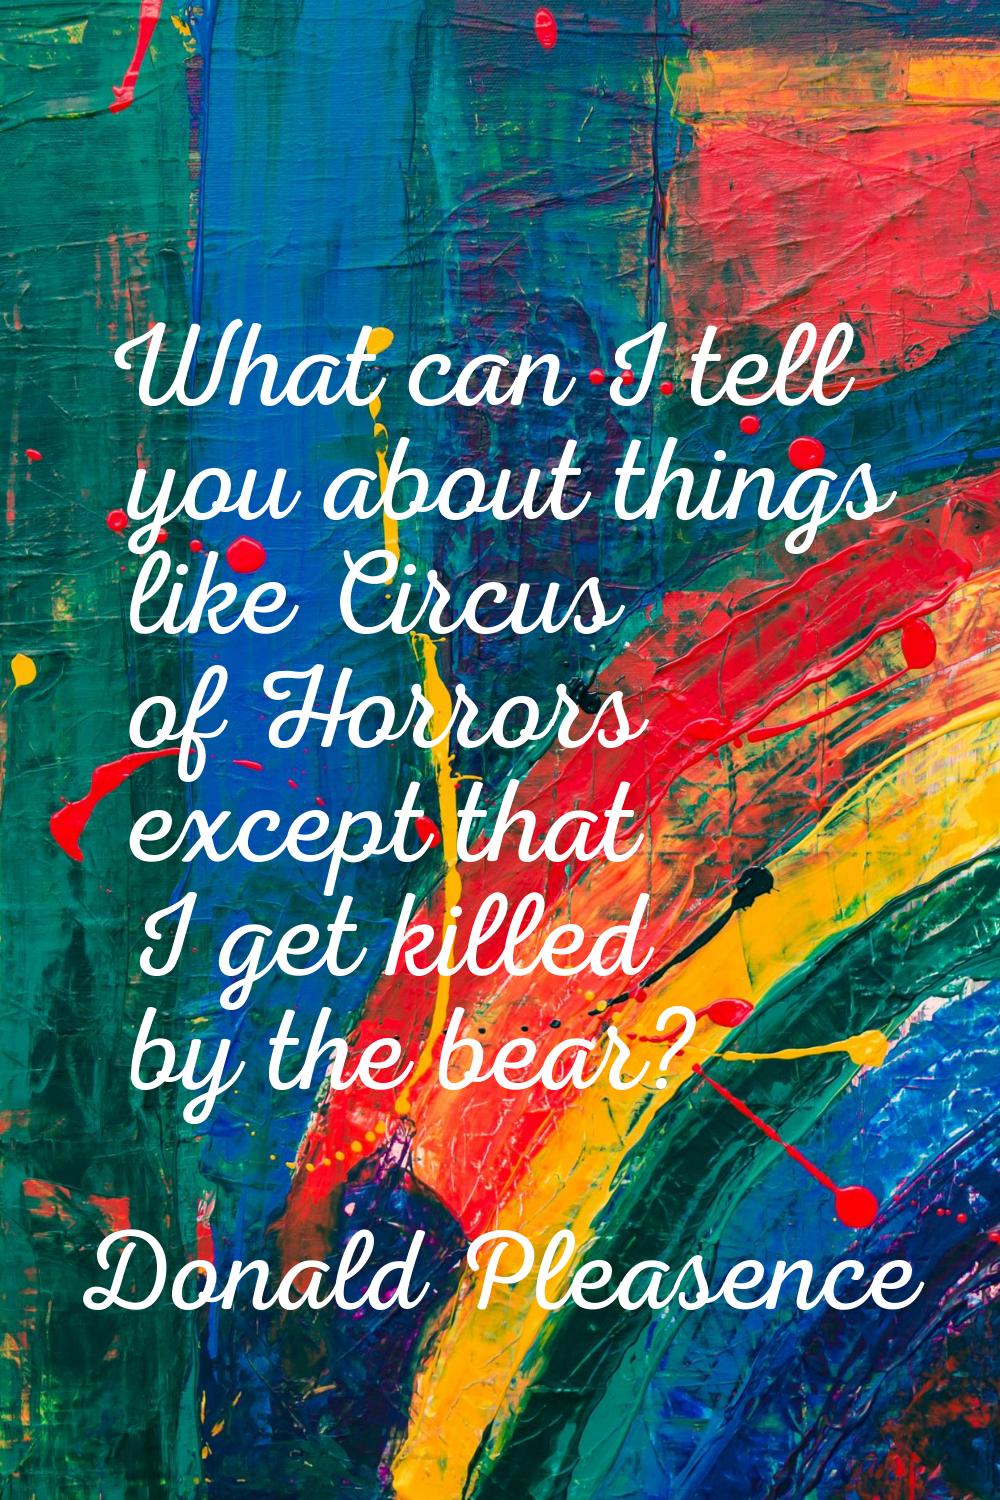 What can I tell you about things like Circus of Horrors except that I get killed by the bear?